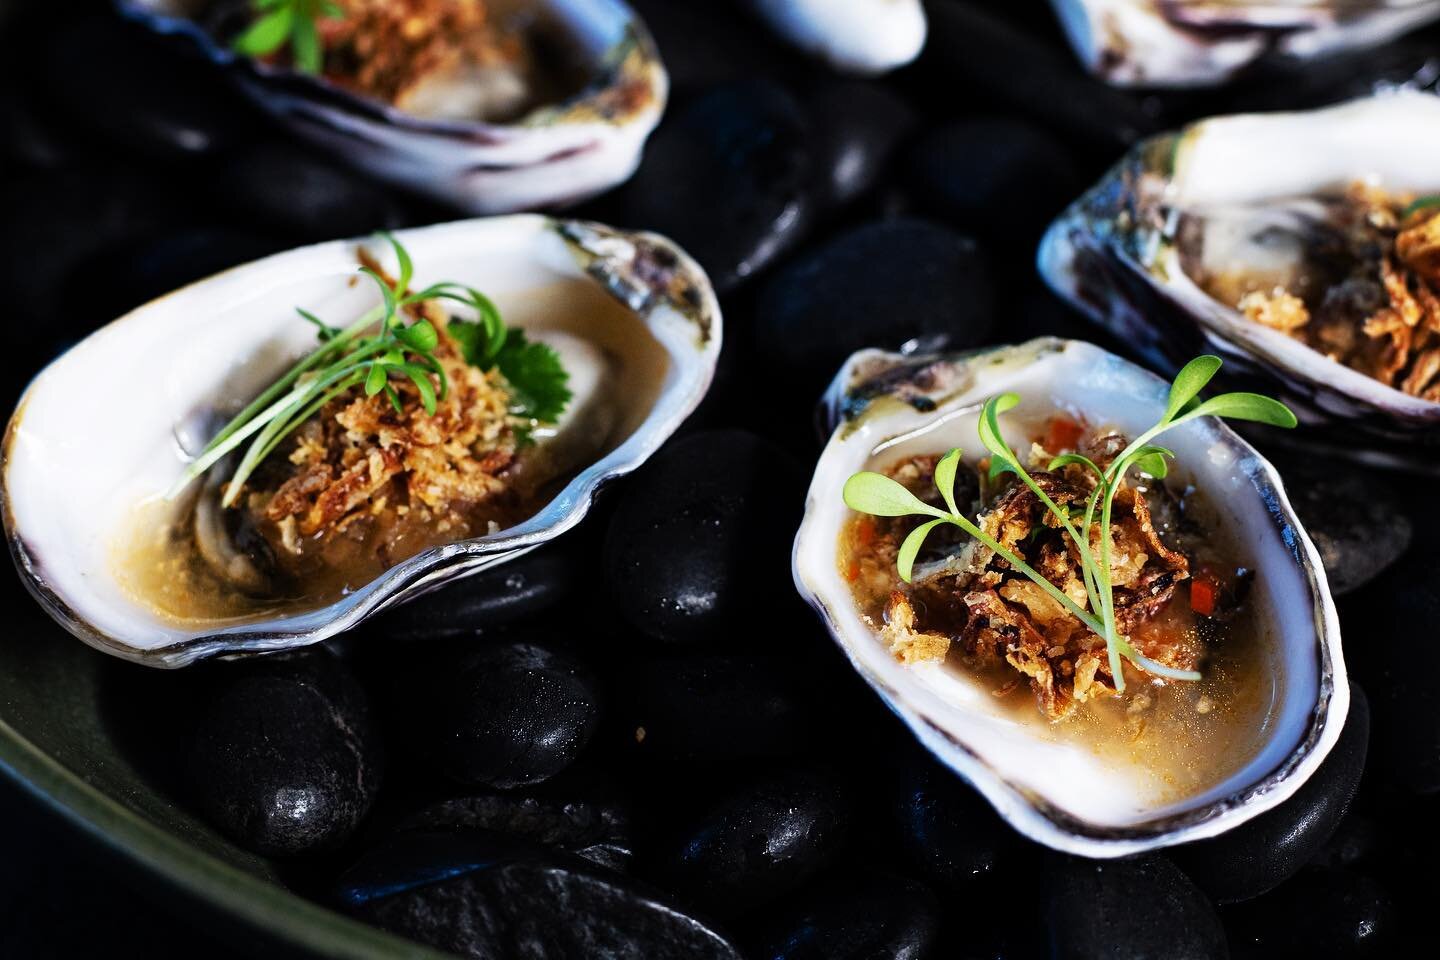 Our high quality, fresh oysters served natural or with our devine, Vietnamese-inspired vinaigrette.. a great way to start your Tokyo Doll experience.

Book now, link in bio!
 #byronbay #byronfood #byron #byronbayrestaurant #byronfoodie #byronbayguide